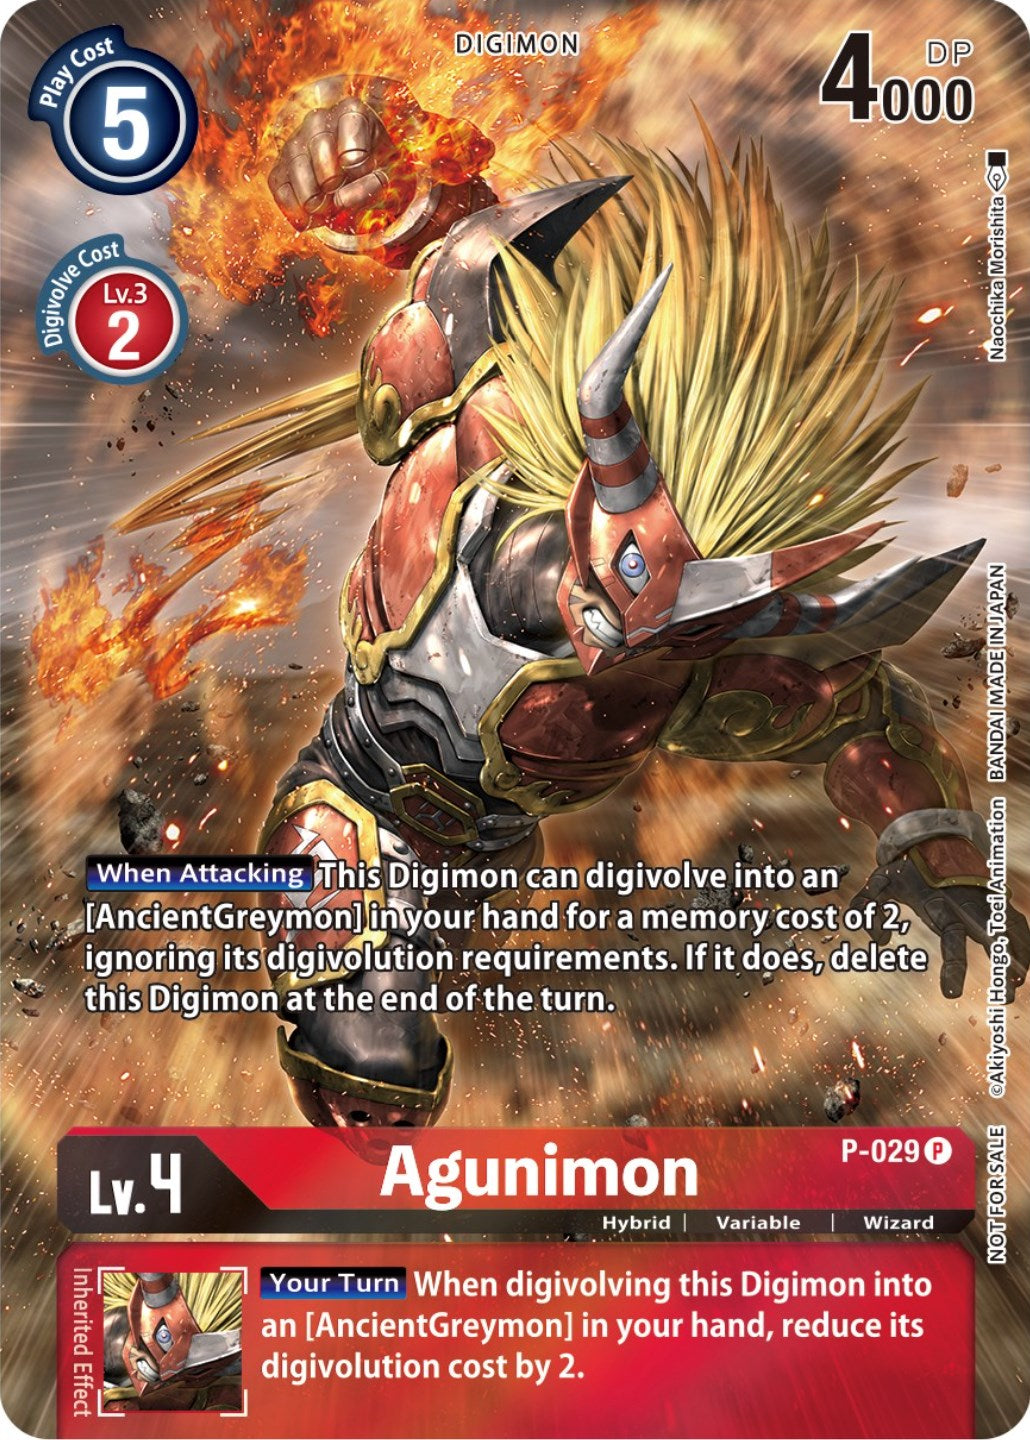 Agunimon [P-029] (2nd Anniversary Frontier Card) [Promotional Cards] | Shuffle n Cut Hobbies & Games